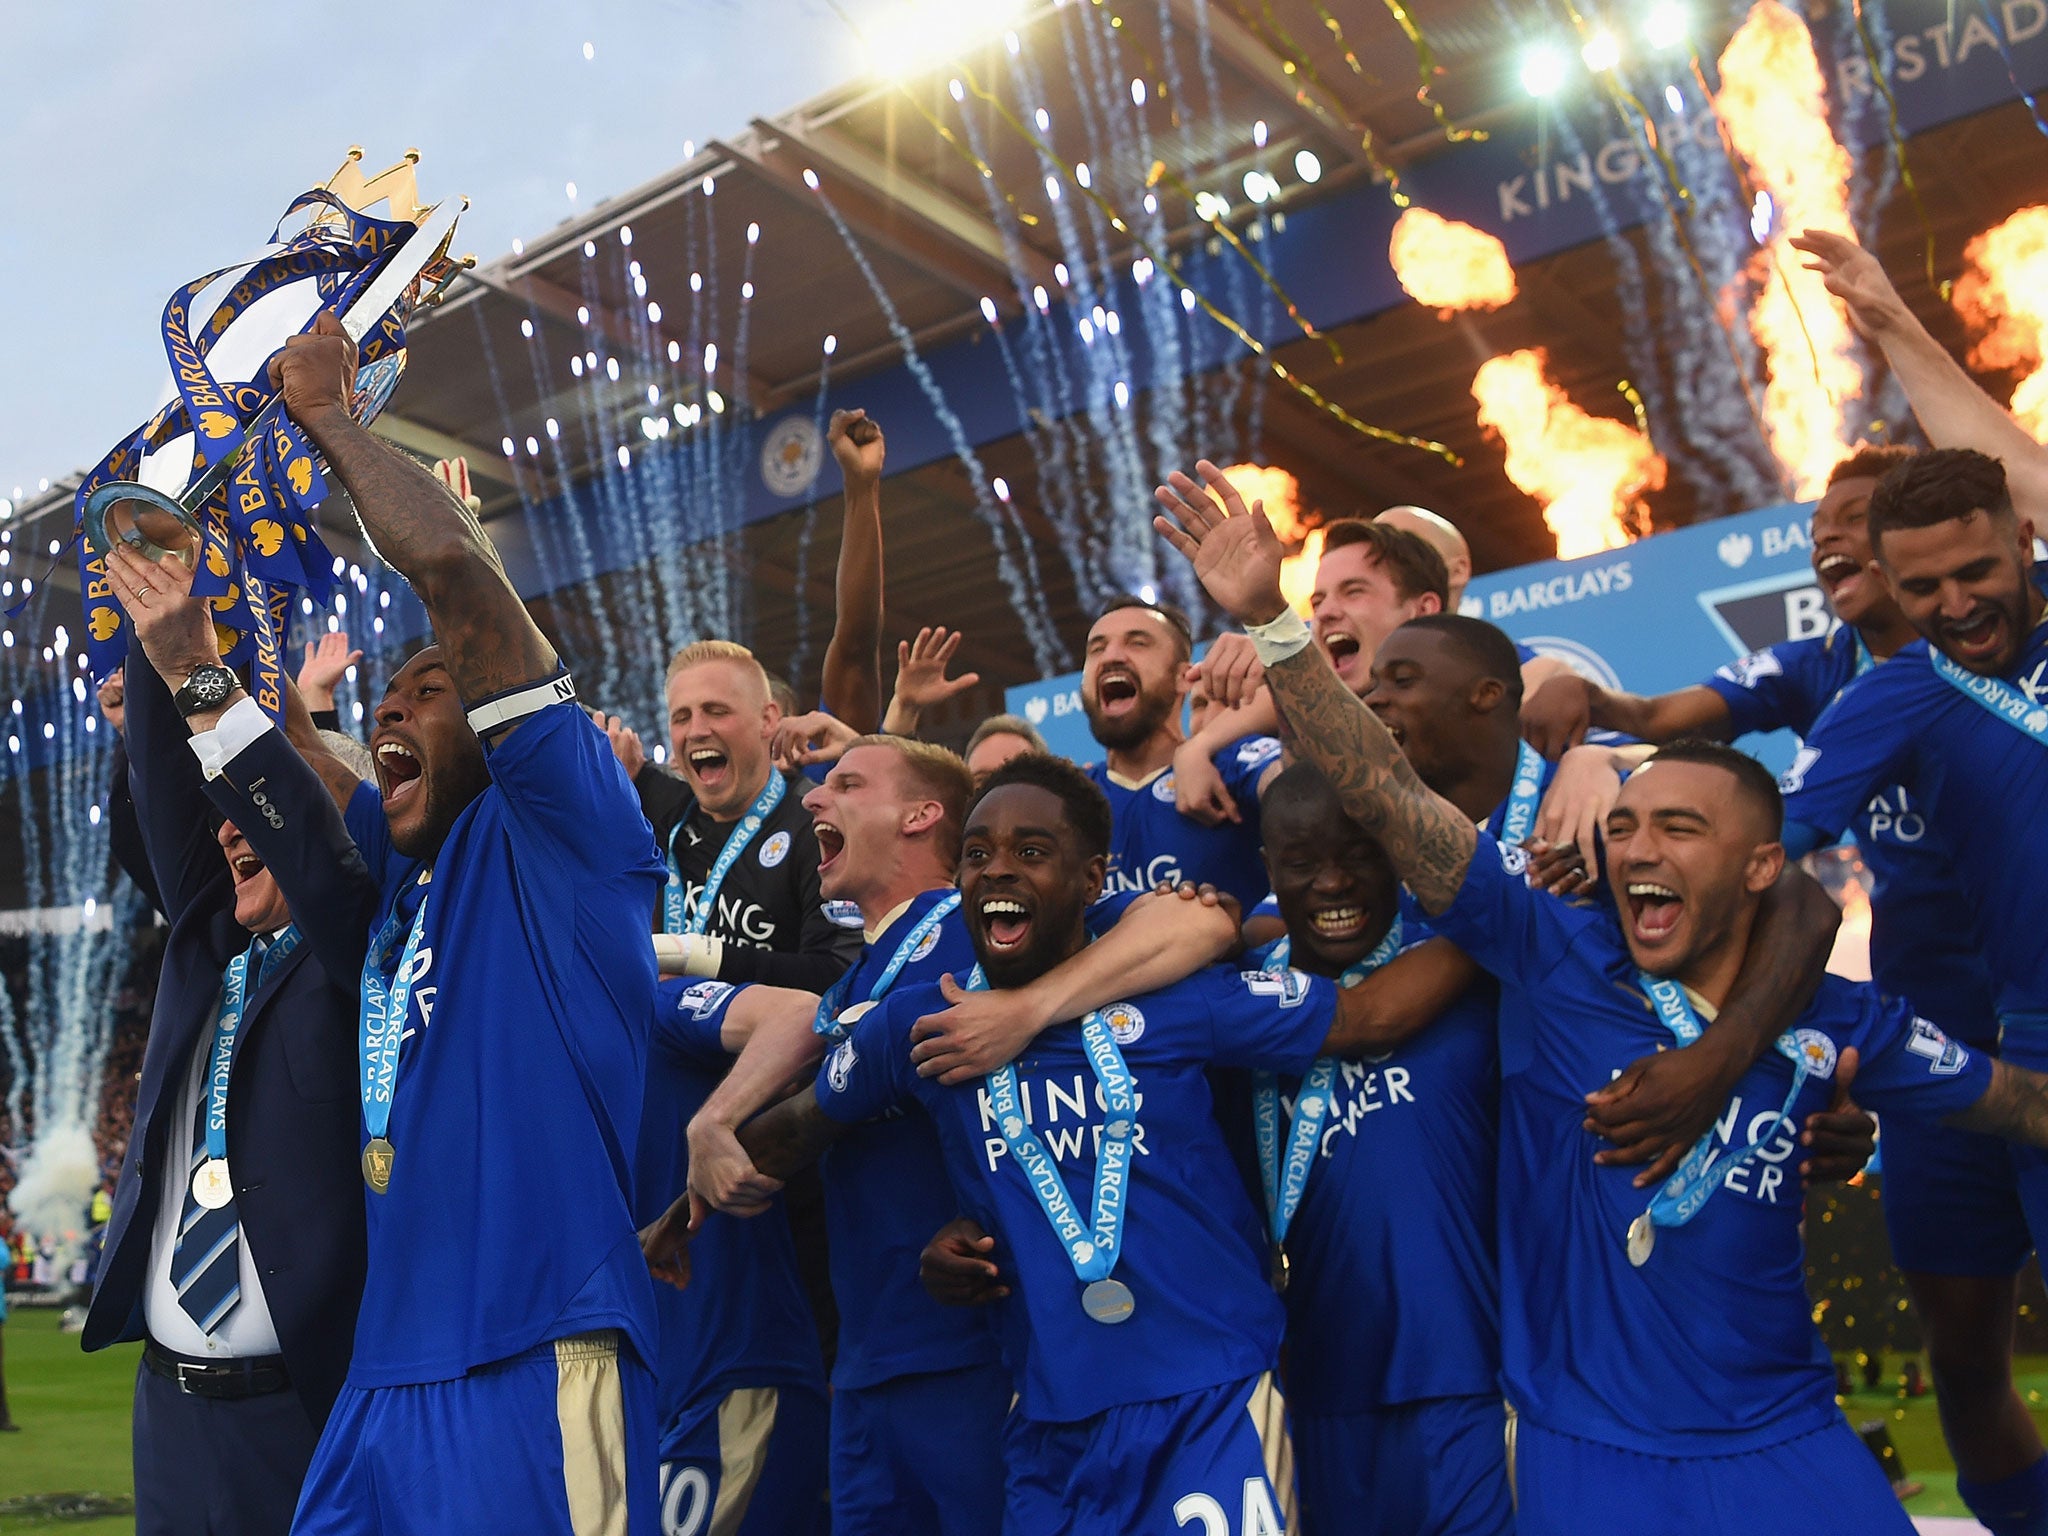 Leicester look unlikely to recreate the historic success of last season